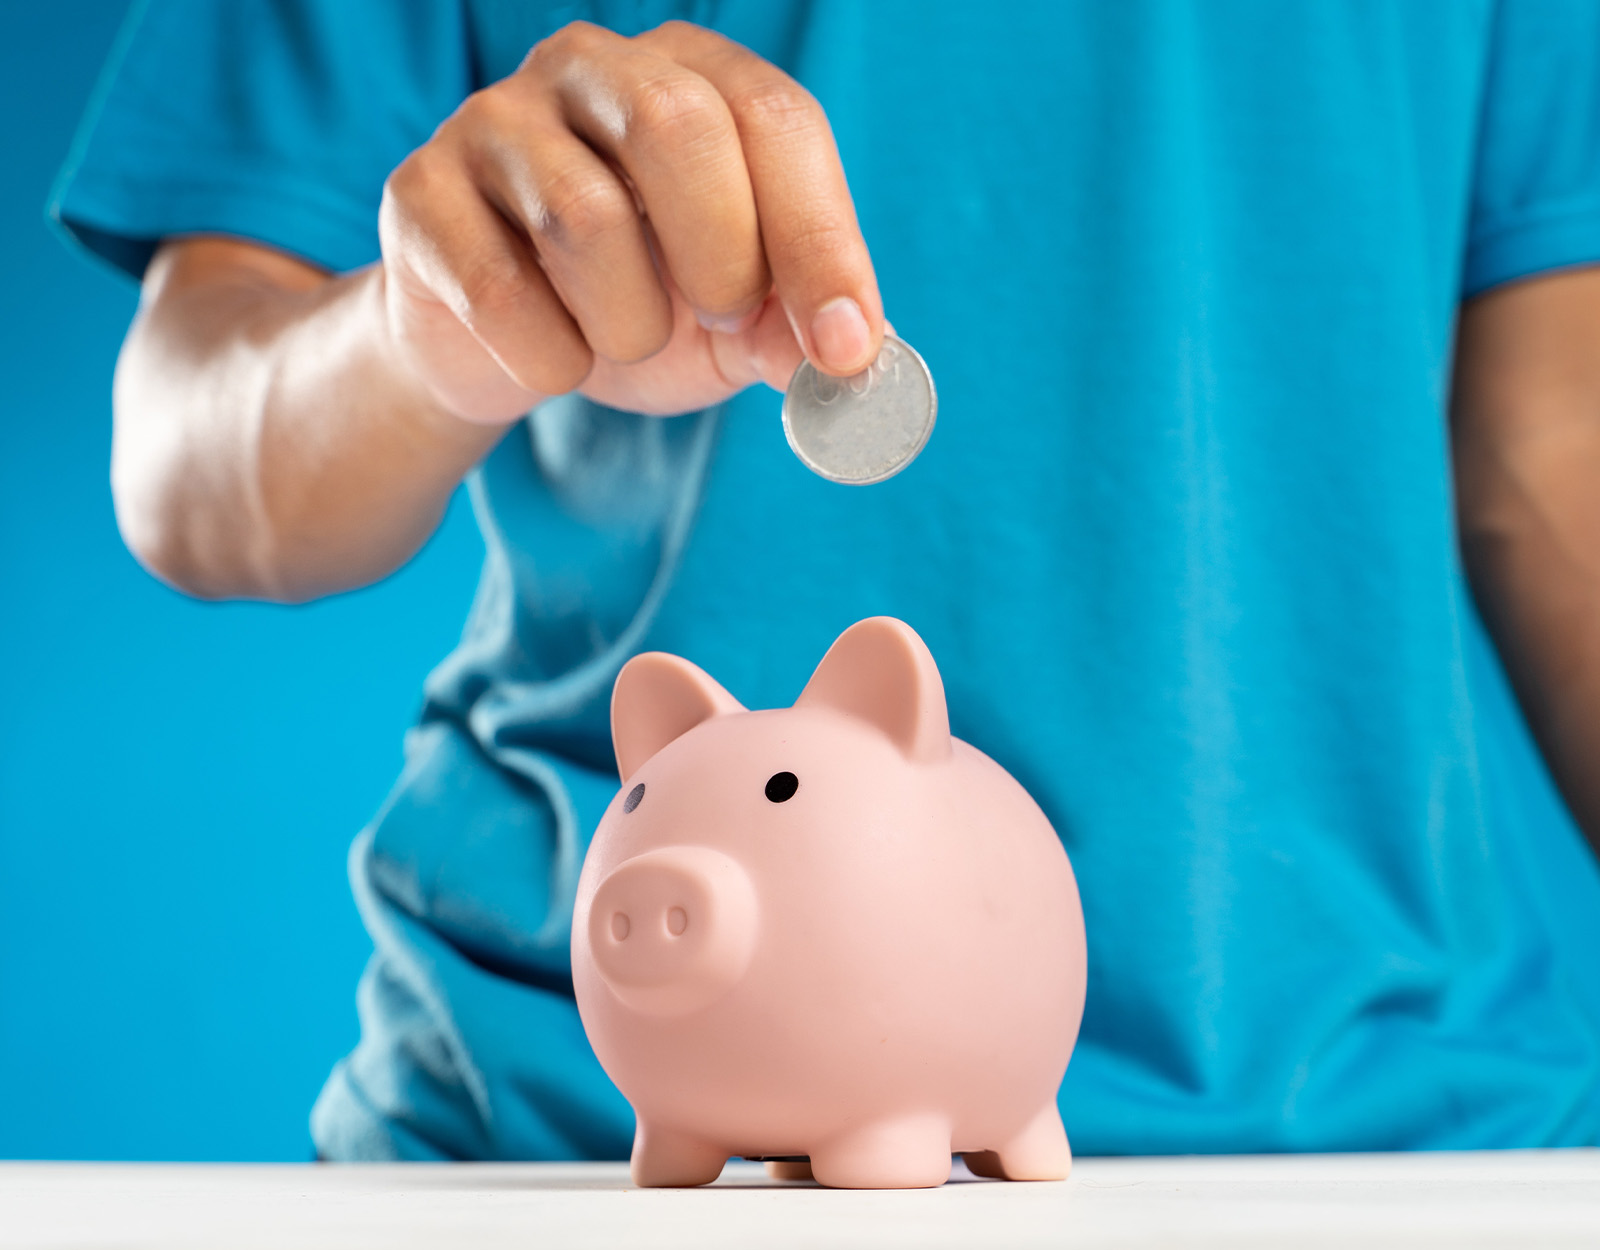 14 Ways to Teach Kids About Money, Budgeting, and Saving